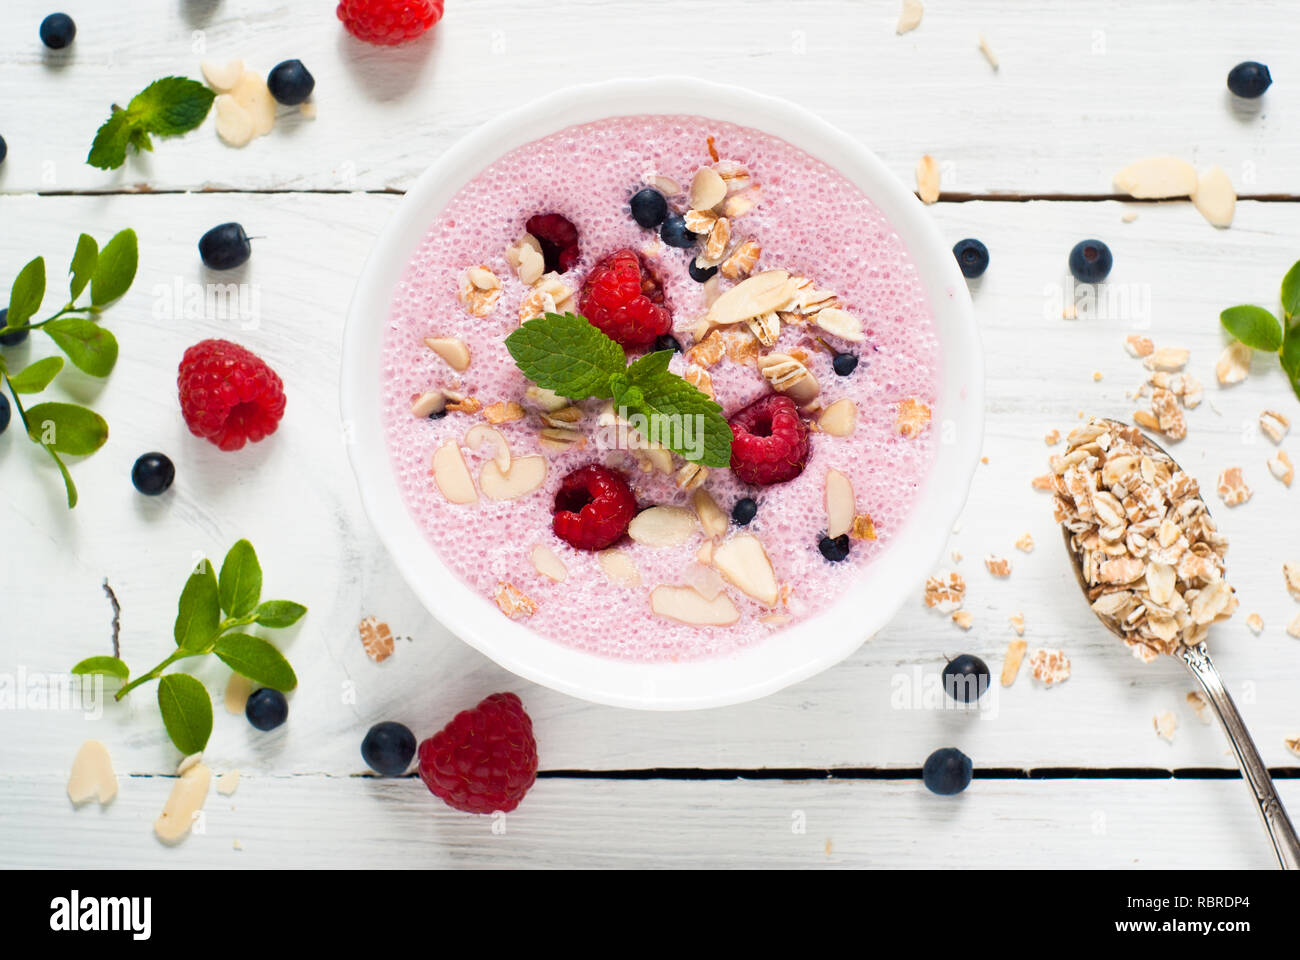 Yogurt with berries. Homemade yogurt or whipped milk shake with fresh berries. Serve with berries, almond flakes and oat flakes. Stock Photo